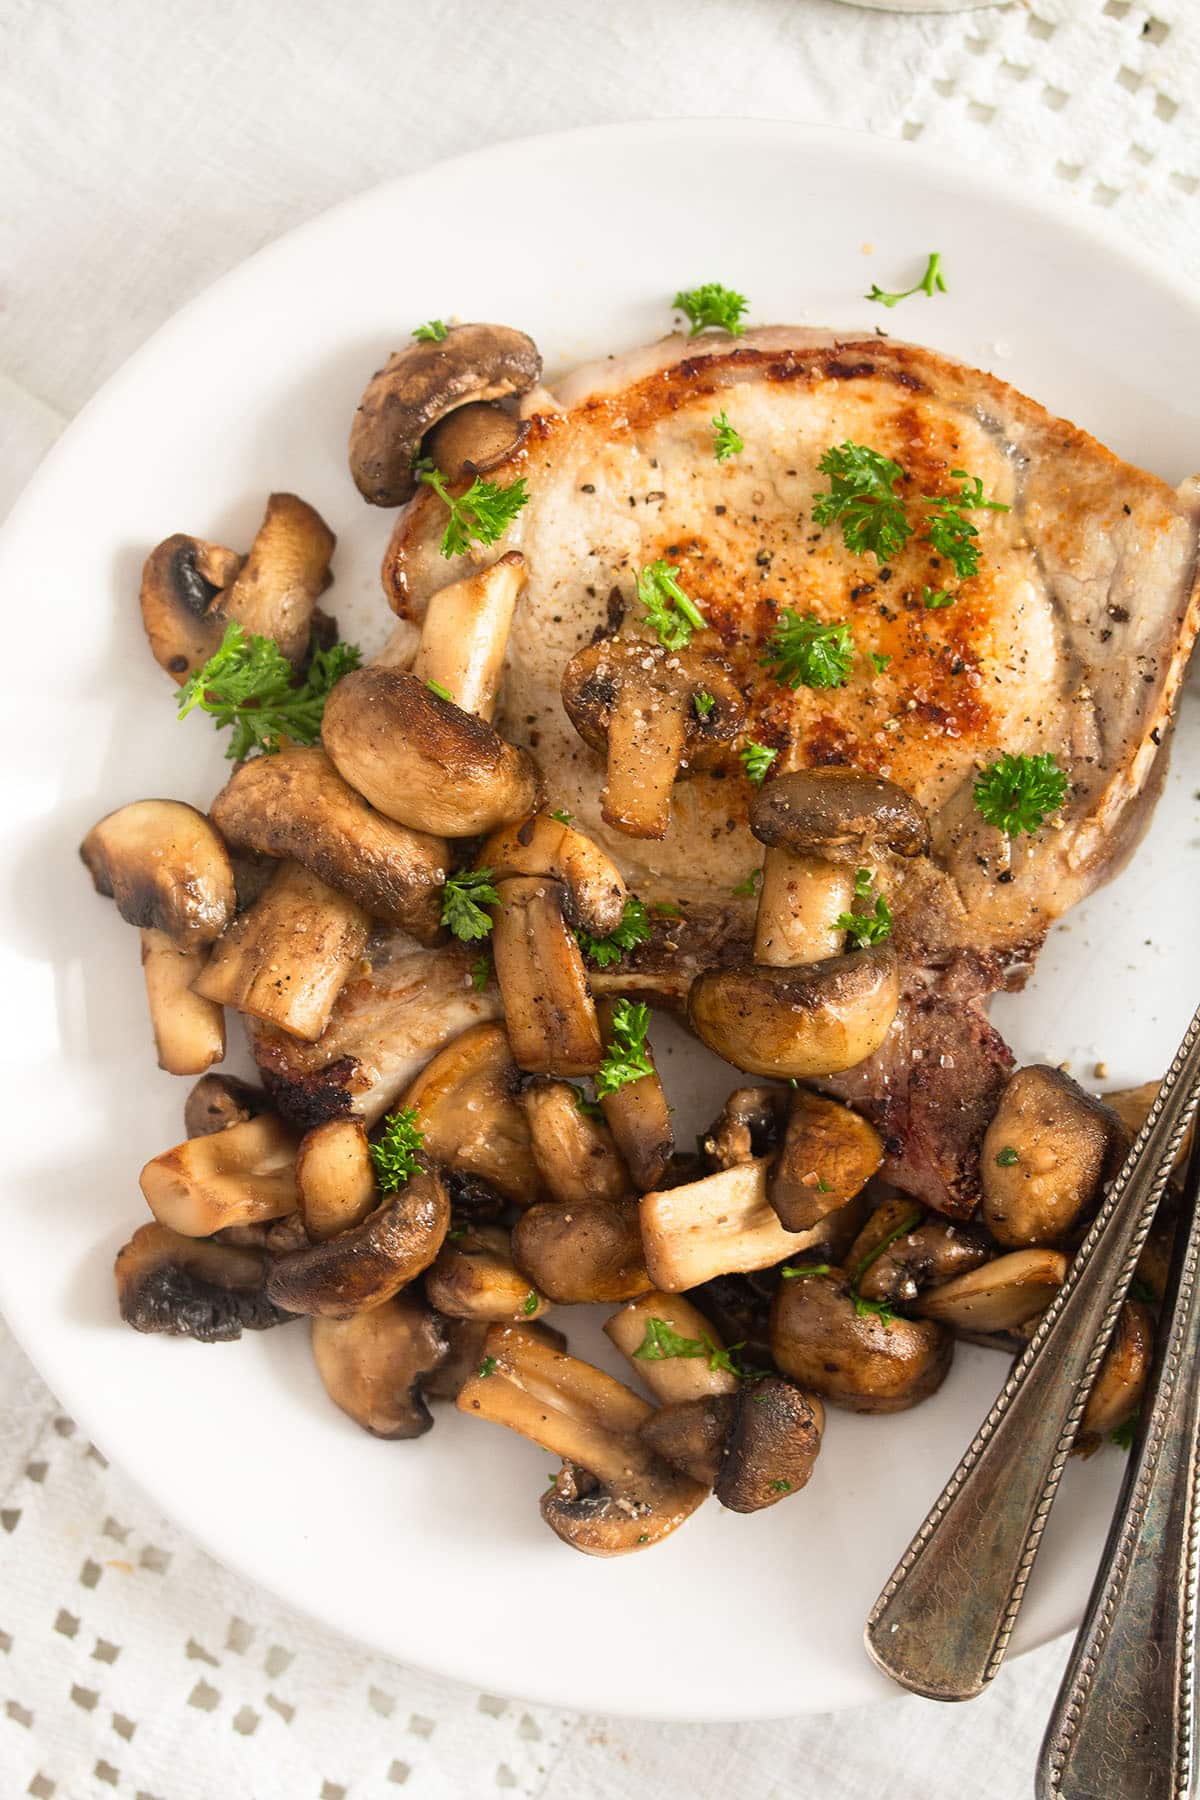 steak and sauteed mushrooms on a white plate.